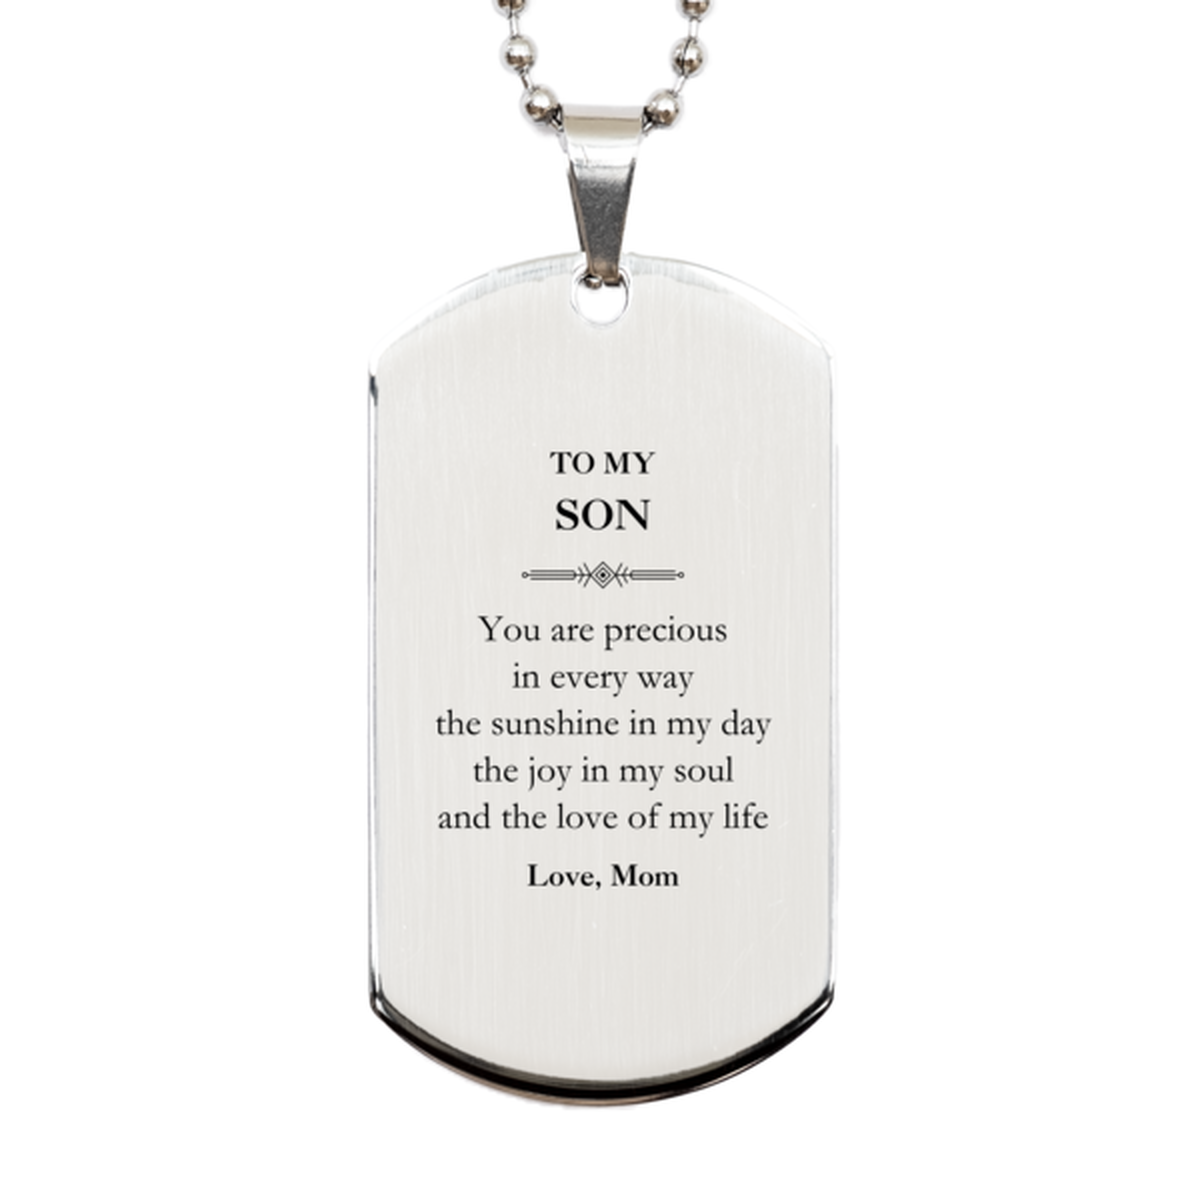 Graduation Gifts for Son Silver Dog Tag Present from Mom, Christmas Son Birthday Gifts Son You are precious in every way the sunshine in my day. Love, Mom